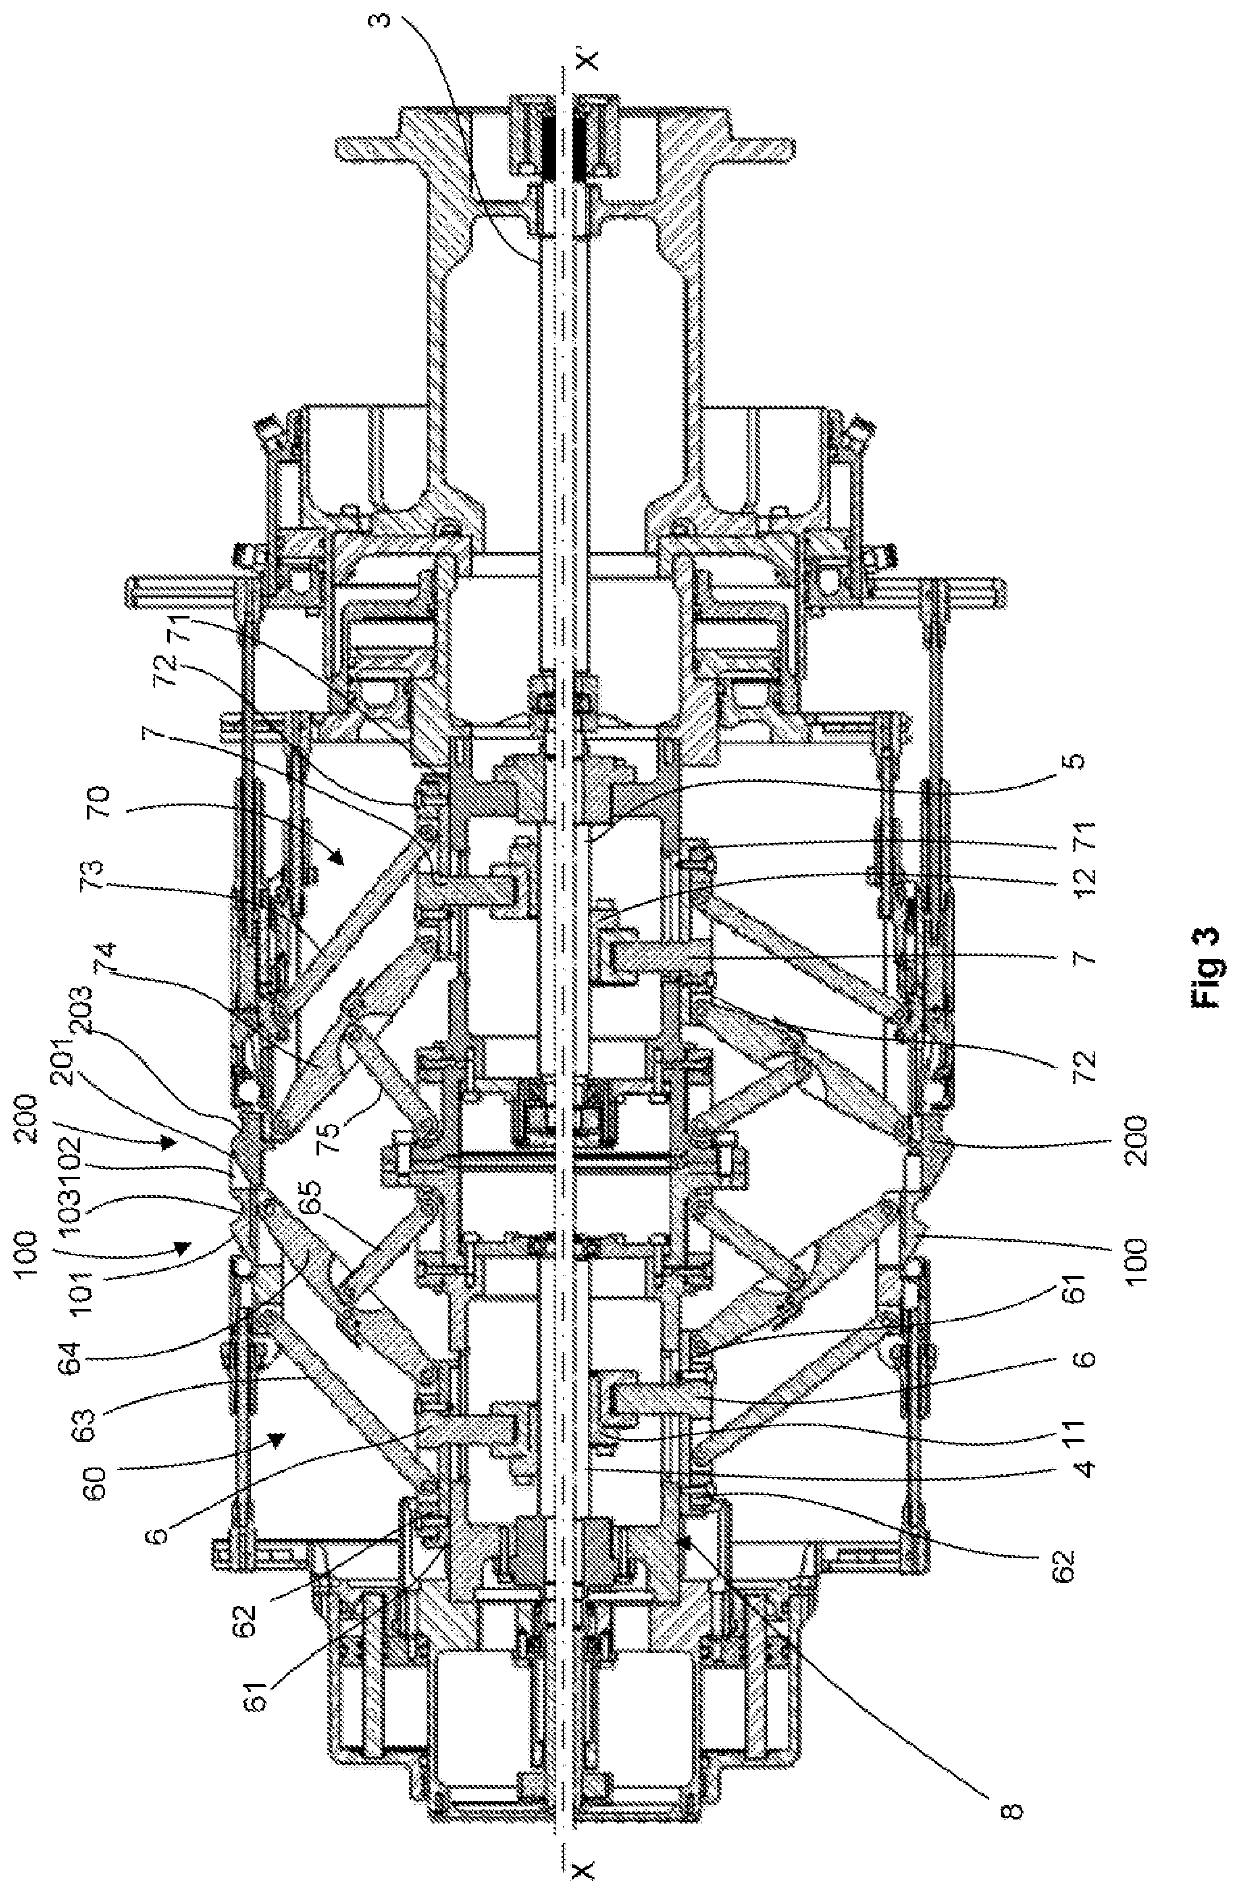 Drum and method for assembling an adapter for mounting a tire on a wheel rim